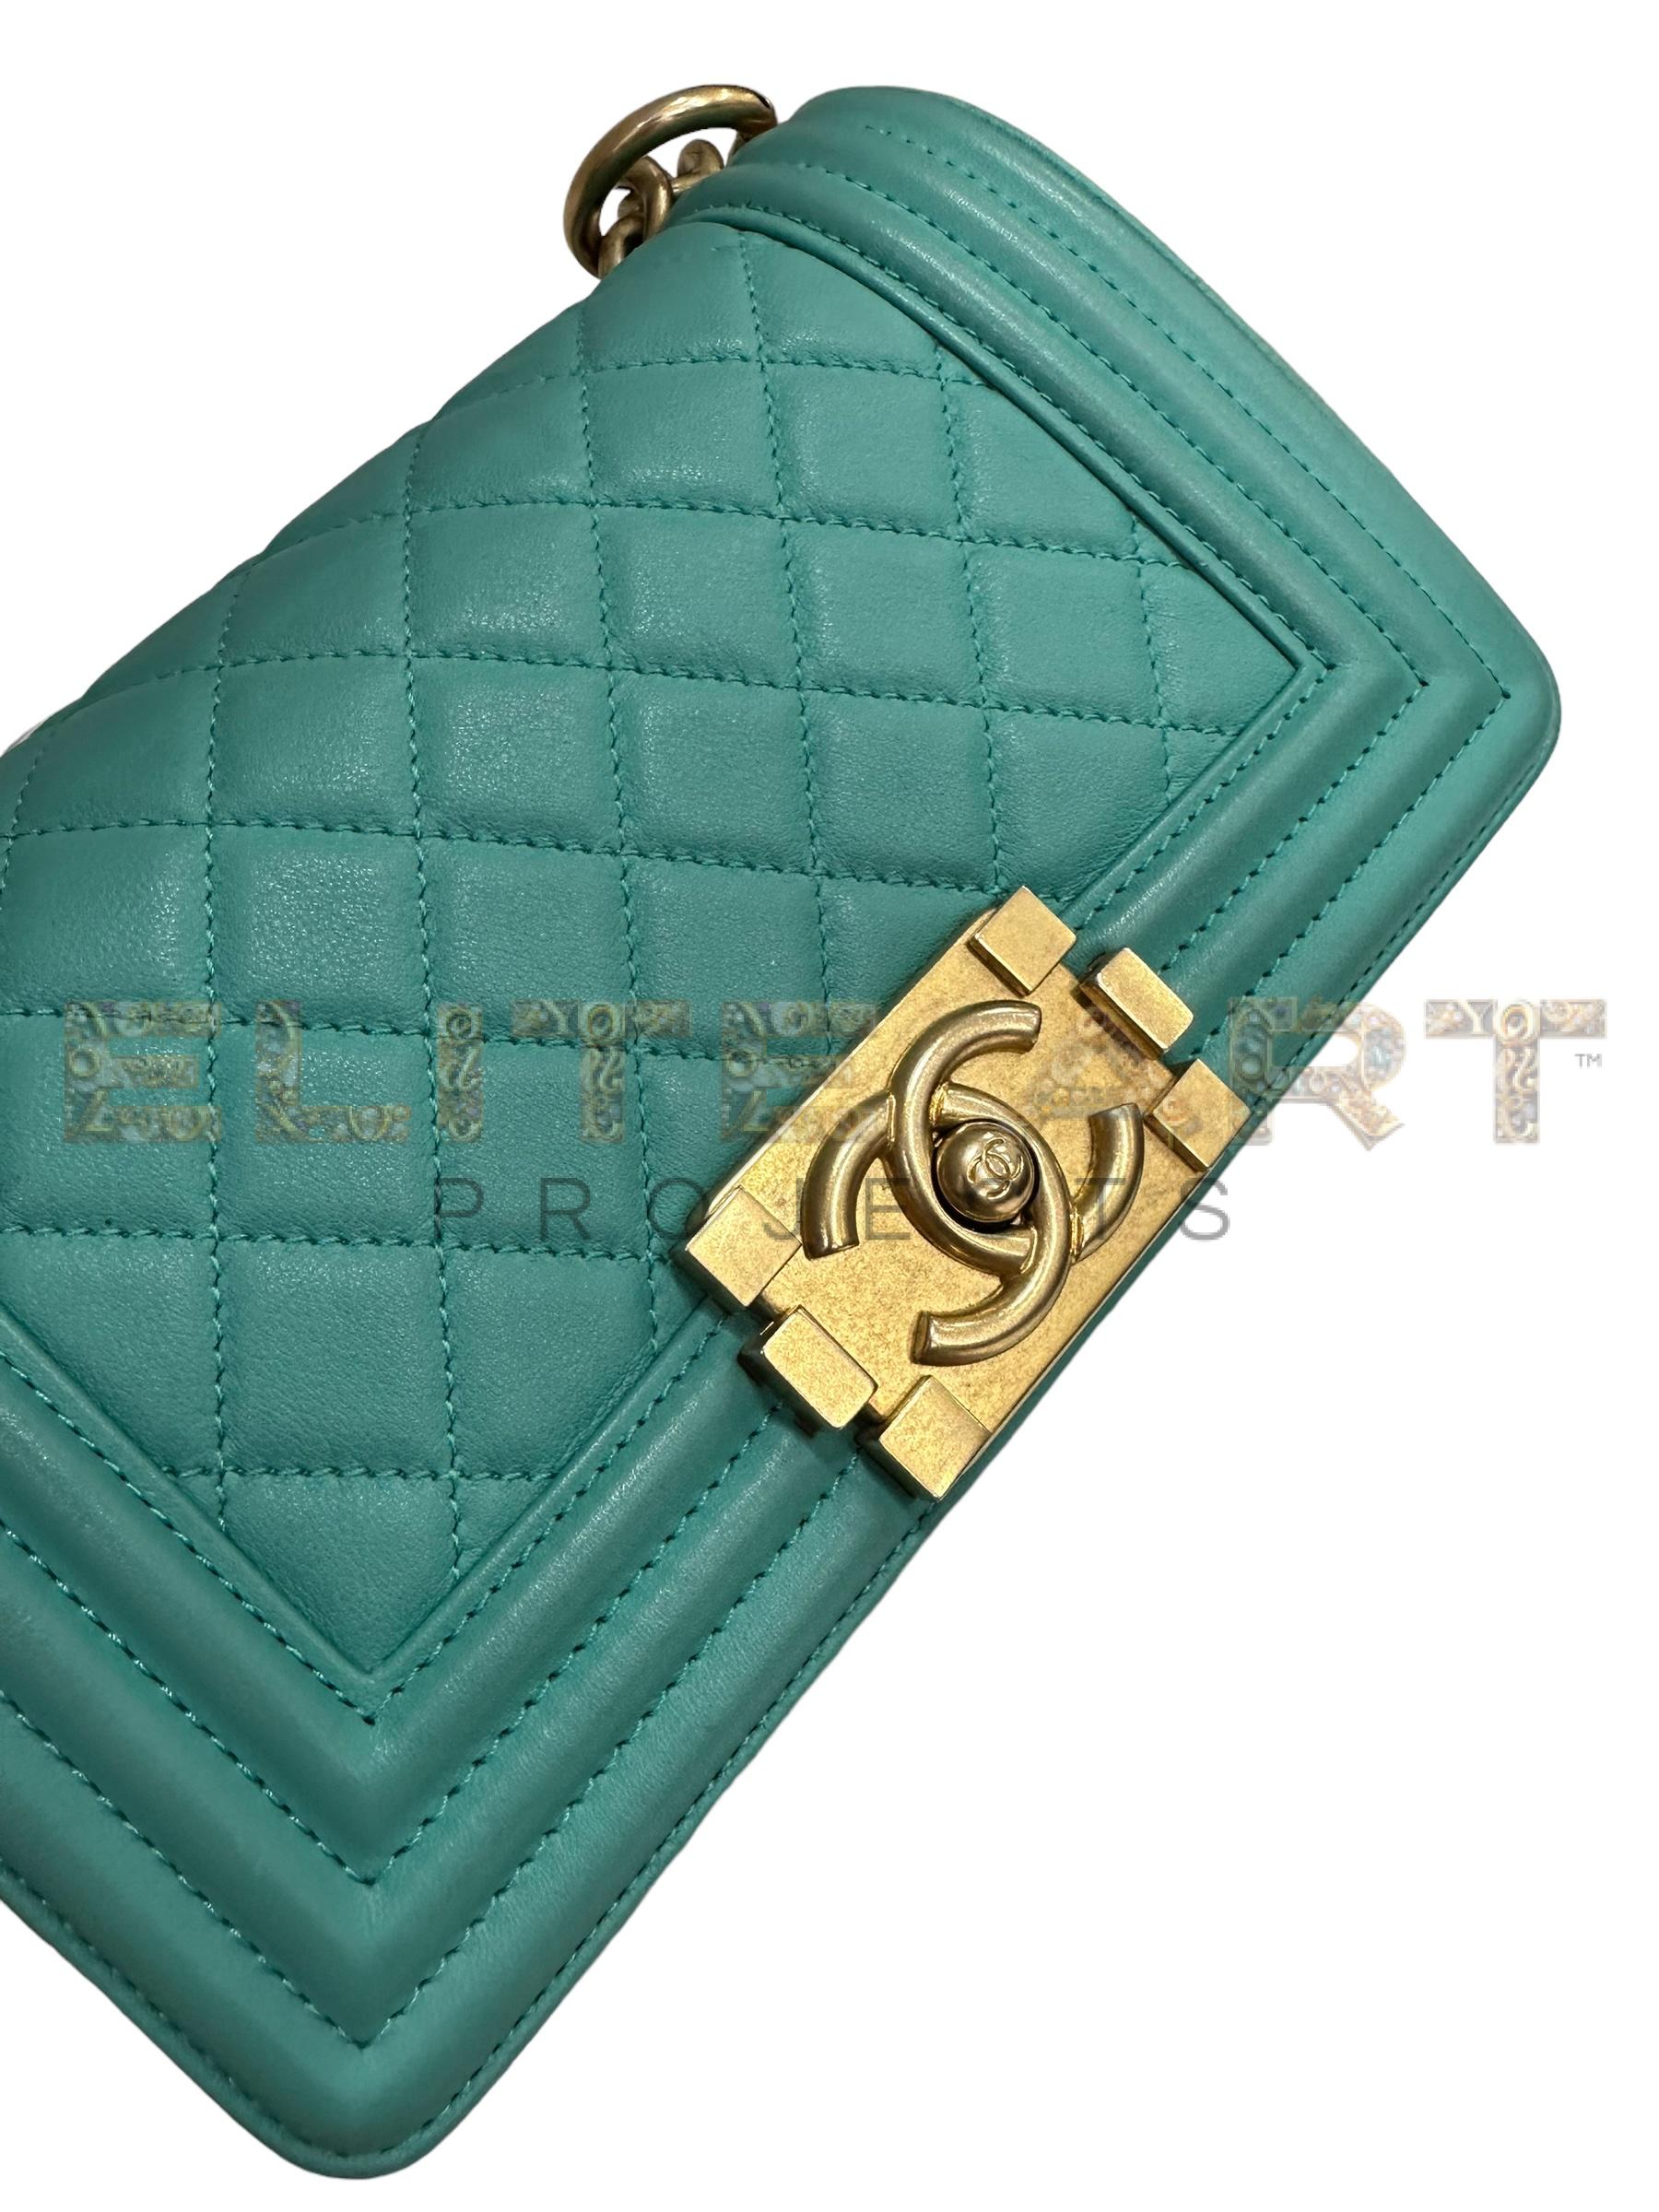 Chanel, Boy, Mini, bag, quilted, Tiffany blue, gold hardware, CC logo, adjustable strap, sliding chain, fabric interior, excellent condition